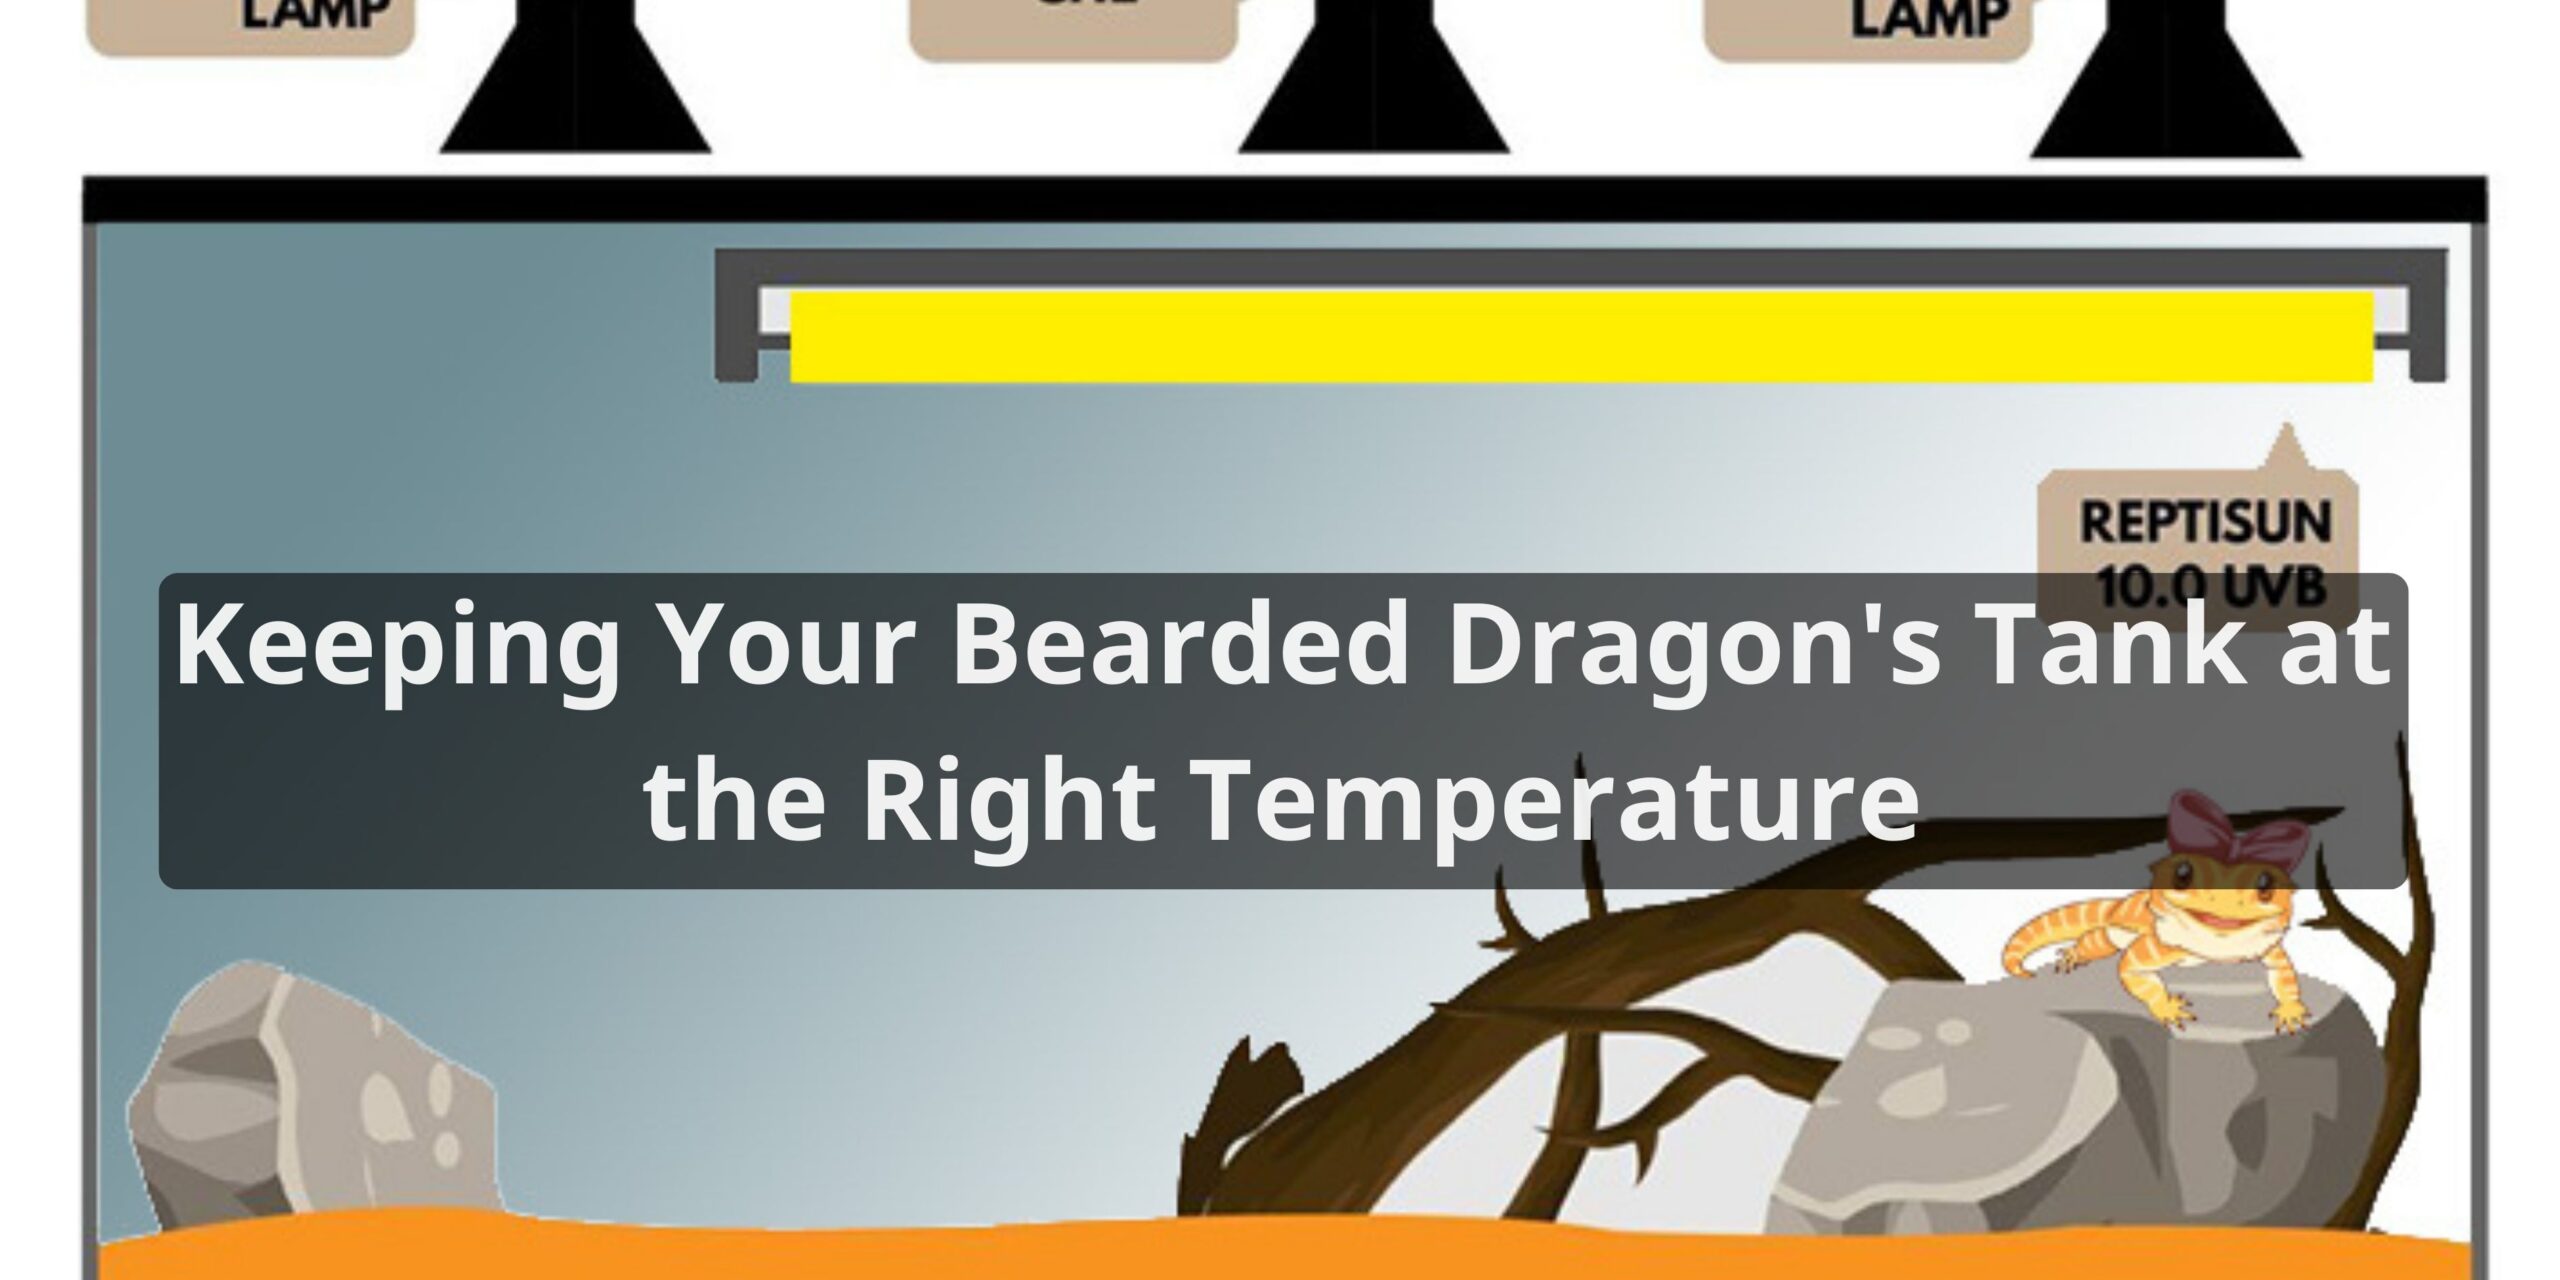 Keeping Your Bearded Dragon's Tank at the Right Temperature